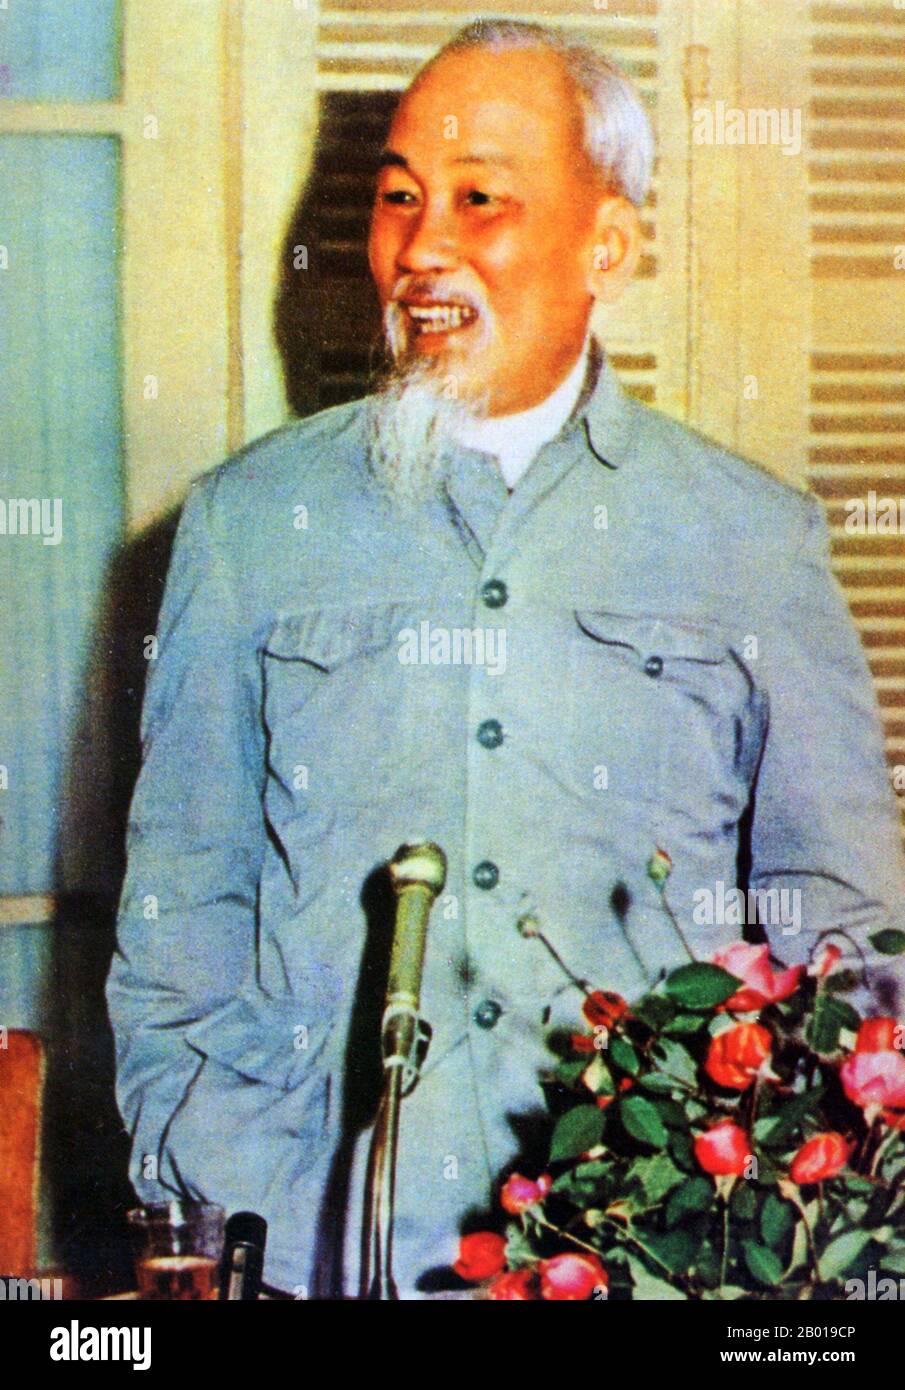 Vietnam: President Ho Chi Minh (19 May 1890 - 3 September 1969) in Hanoi, c. 1950s.  Hồ Chí Minh, born Nguyễn Sinh Cung and also known as Nguyễn Ái Quốc was a Vietnamese Communist revolutionary leader who was prime minister (1946-1955) and president (1945-1969) of the Democratic Republic of Vietnam (North Vietnam). He formed the Democratic Republic of Vietnam and led the Viet Cong during the Vietnam War until his death. Stock Photo